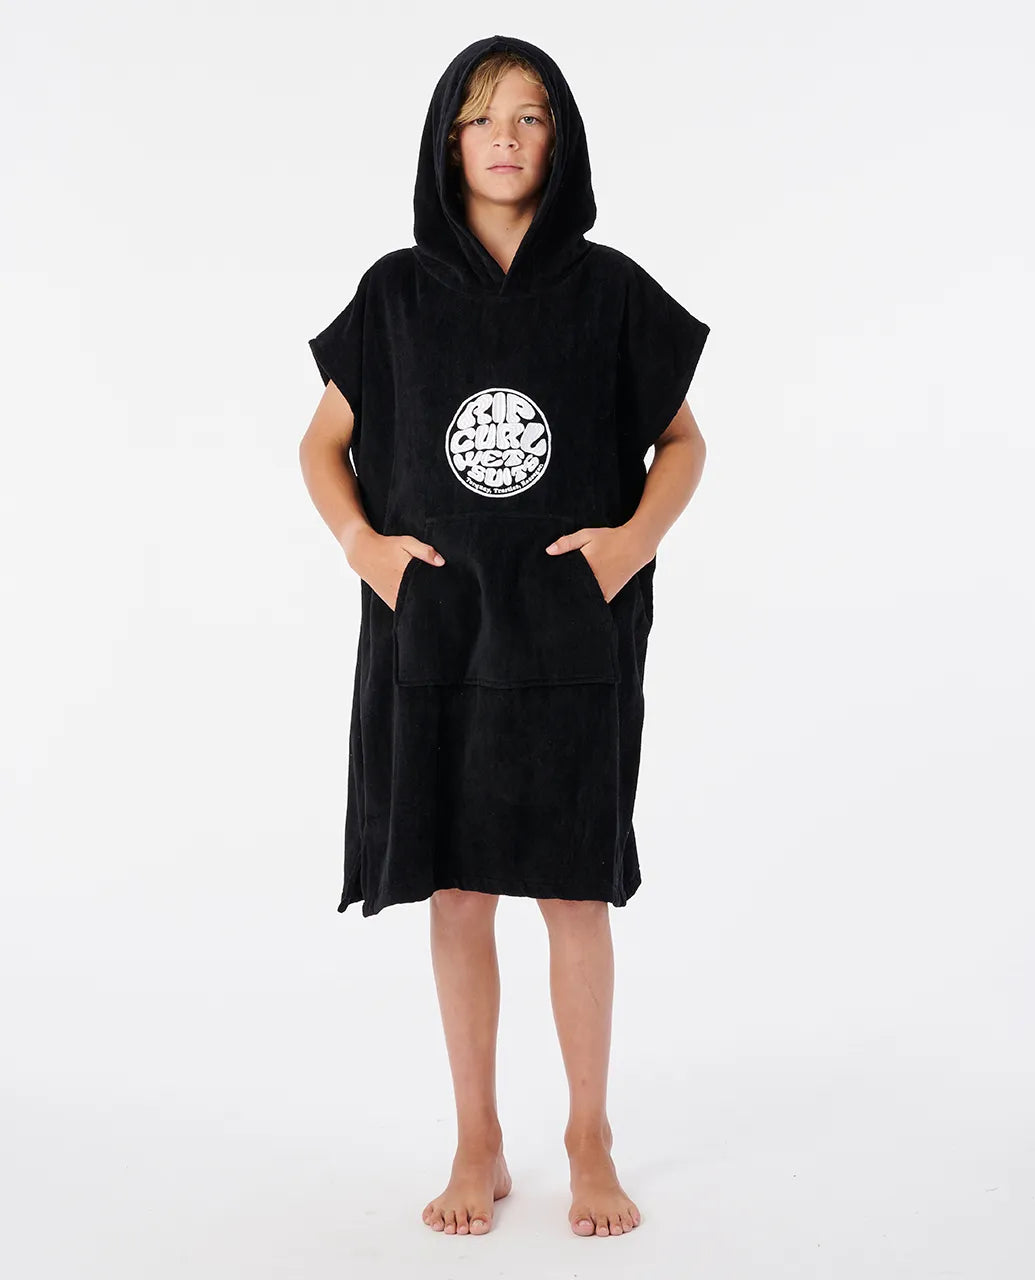 Icons Hooded Towel - Boy